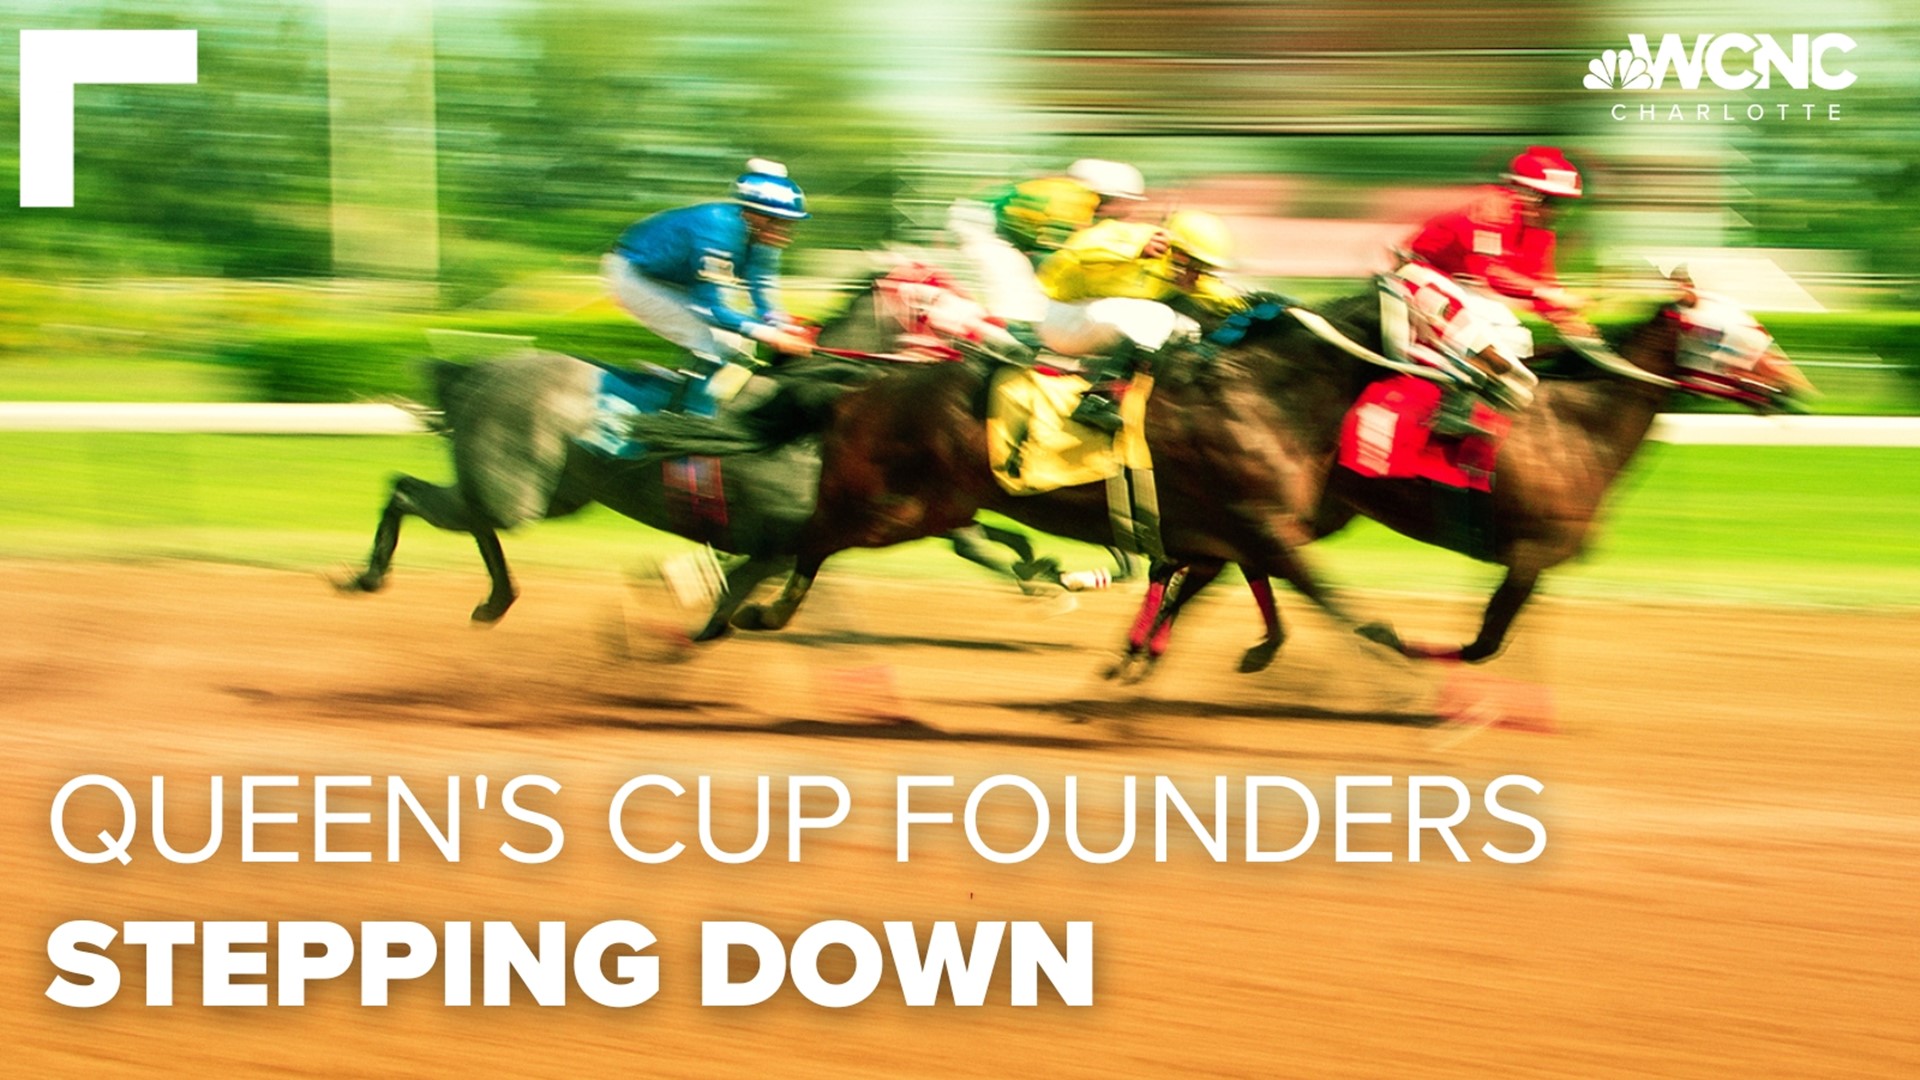 Queen's Cup founders, Bill and Carrington Price, announces they are stepping down. After next year, they will transition the organization to nonprofit Dream On 3.